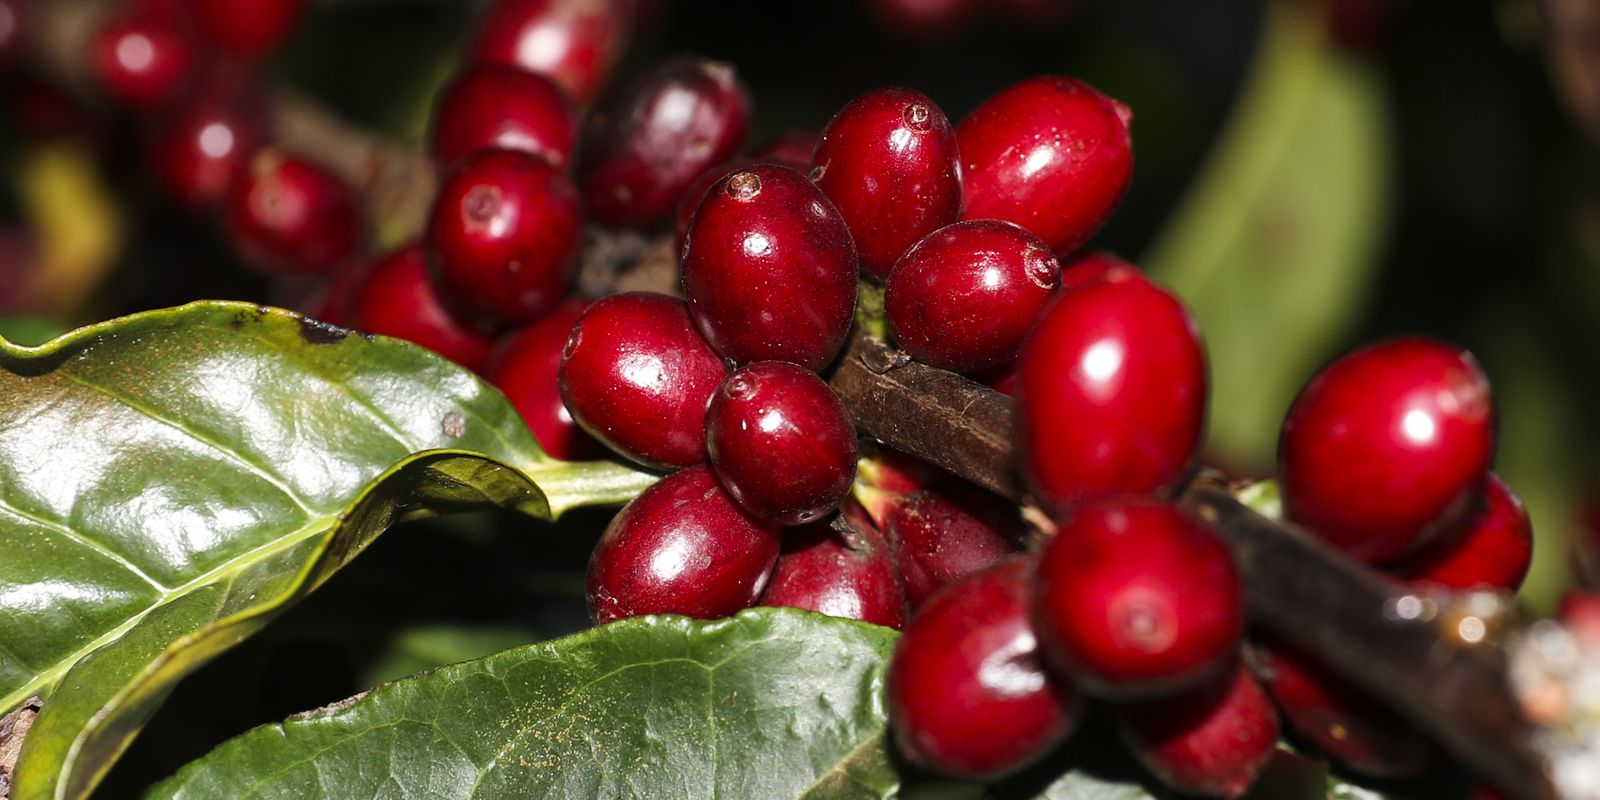 2022 coffee crop could reach 53.4 million bags